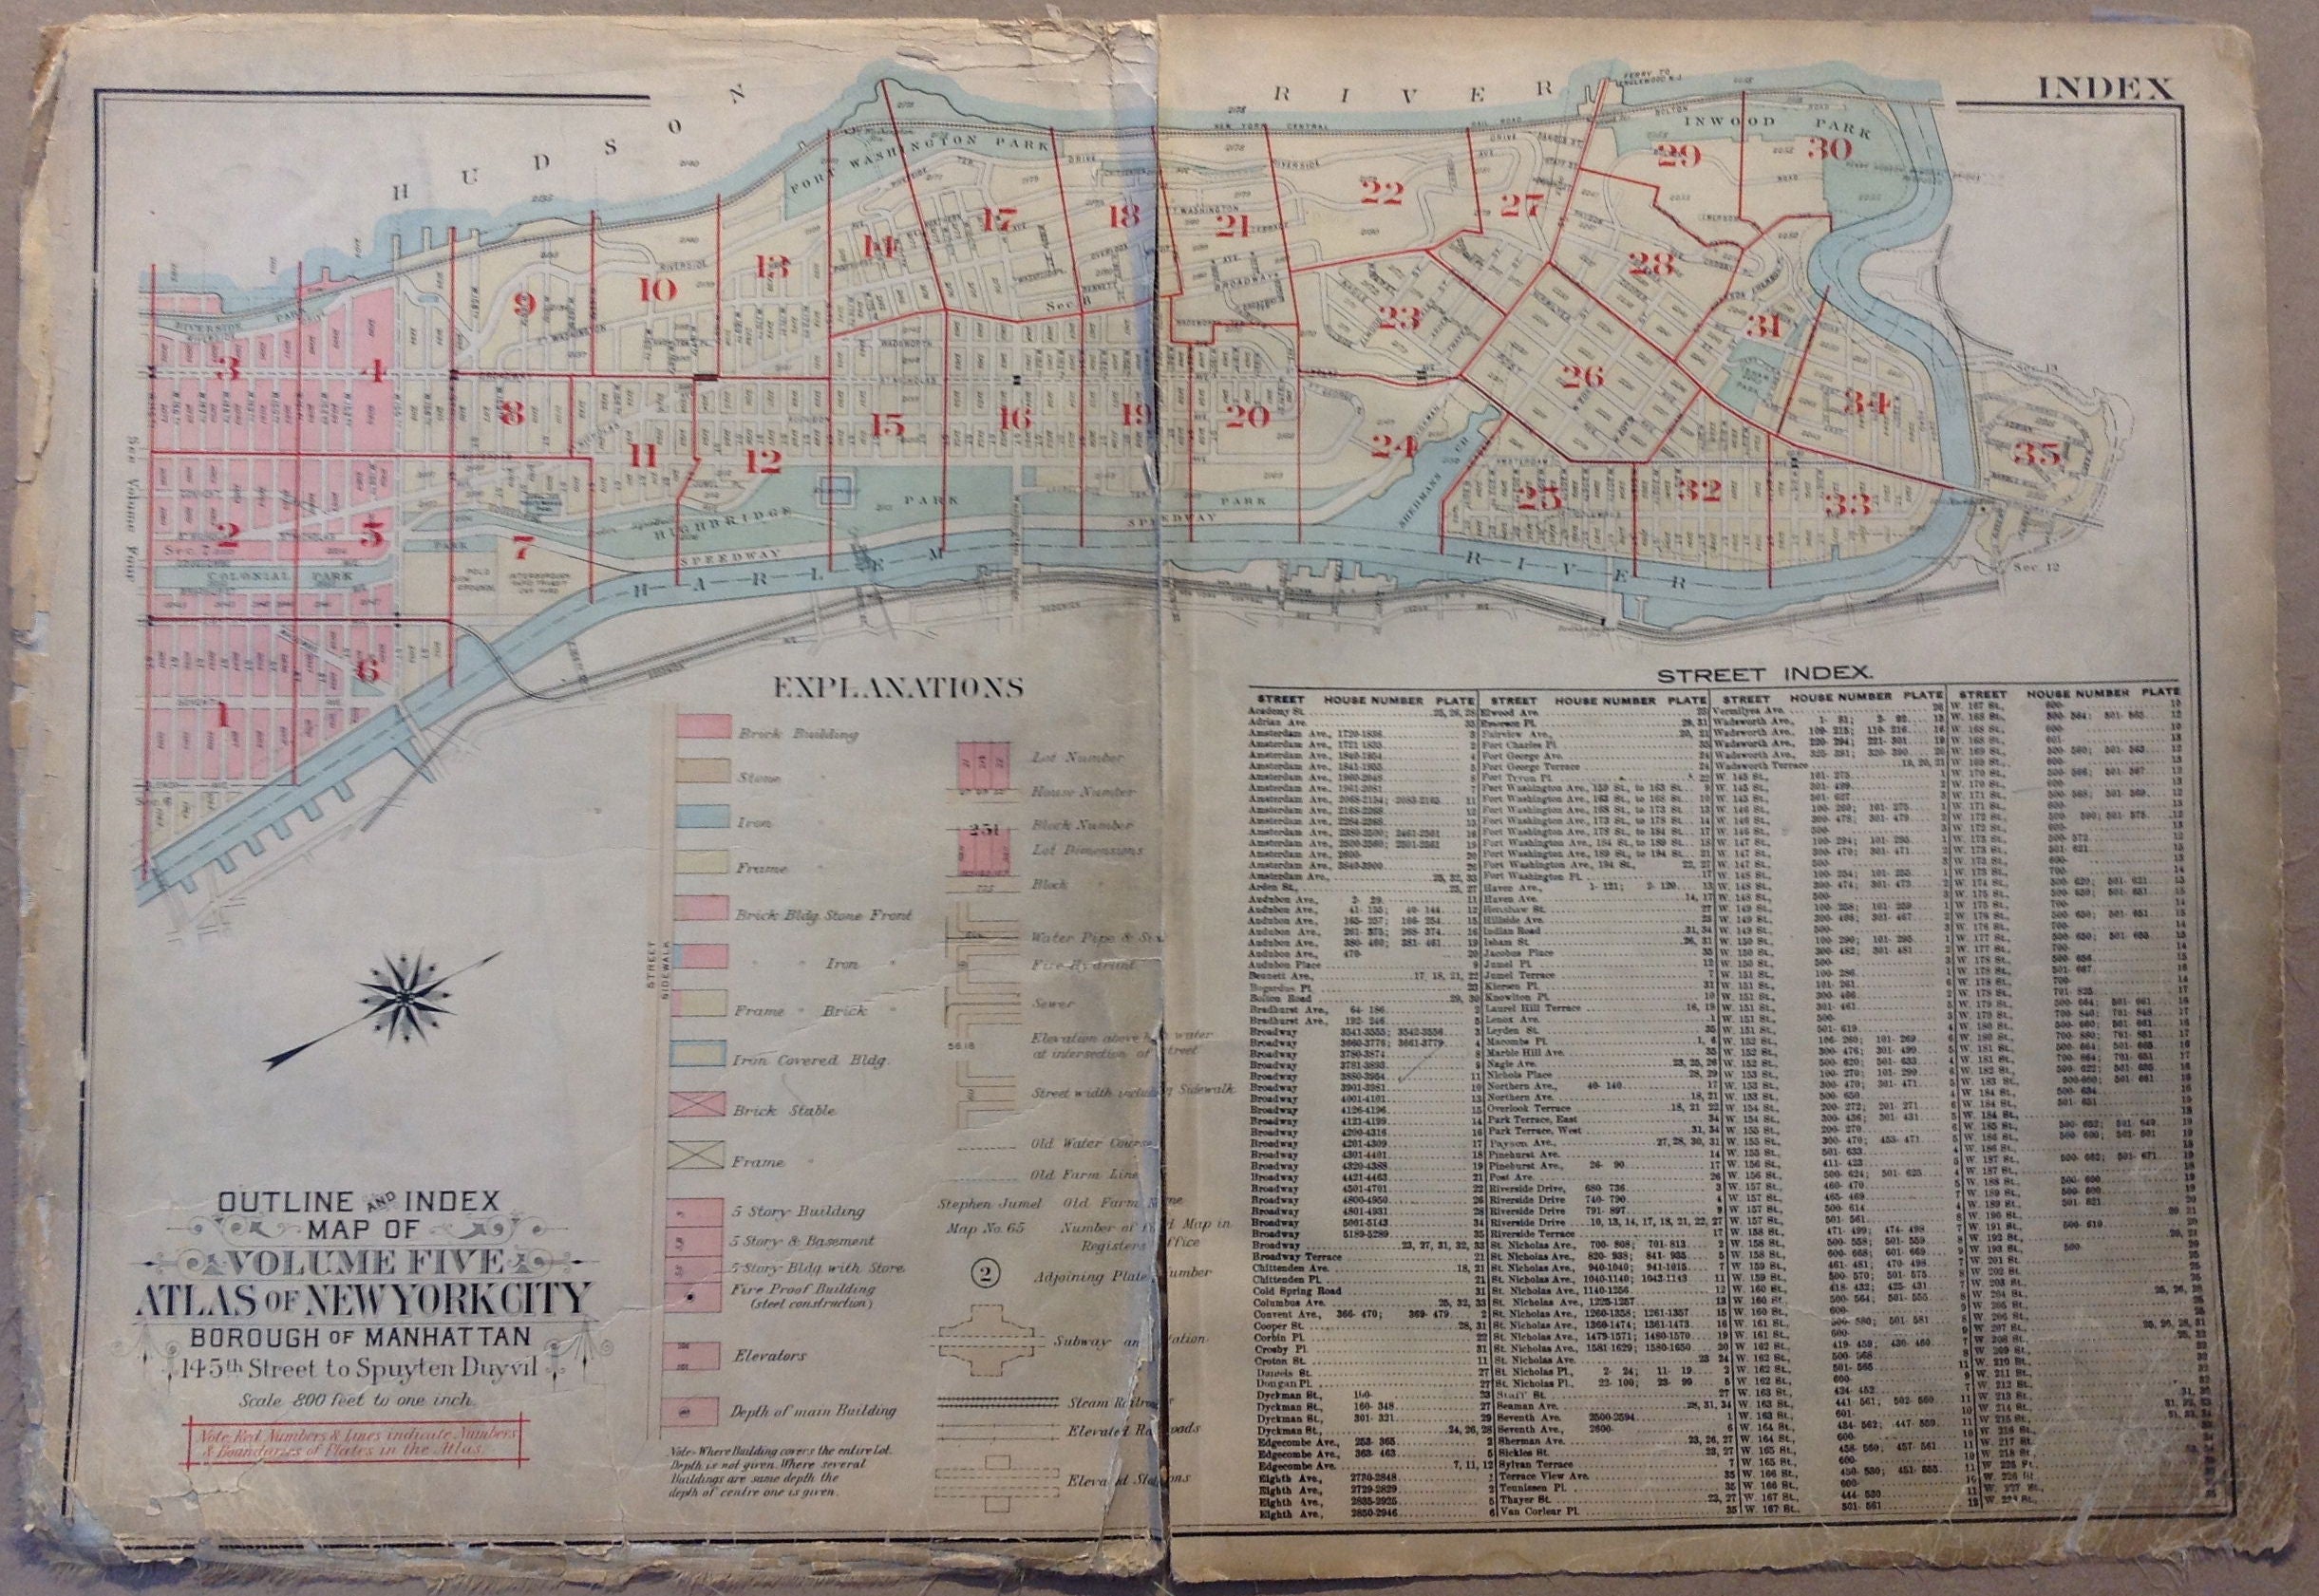 Outline and Index Map of New York City, The Bronx